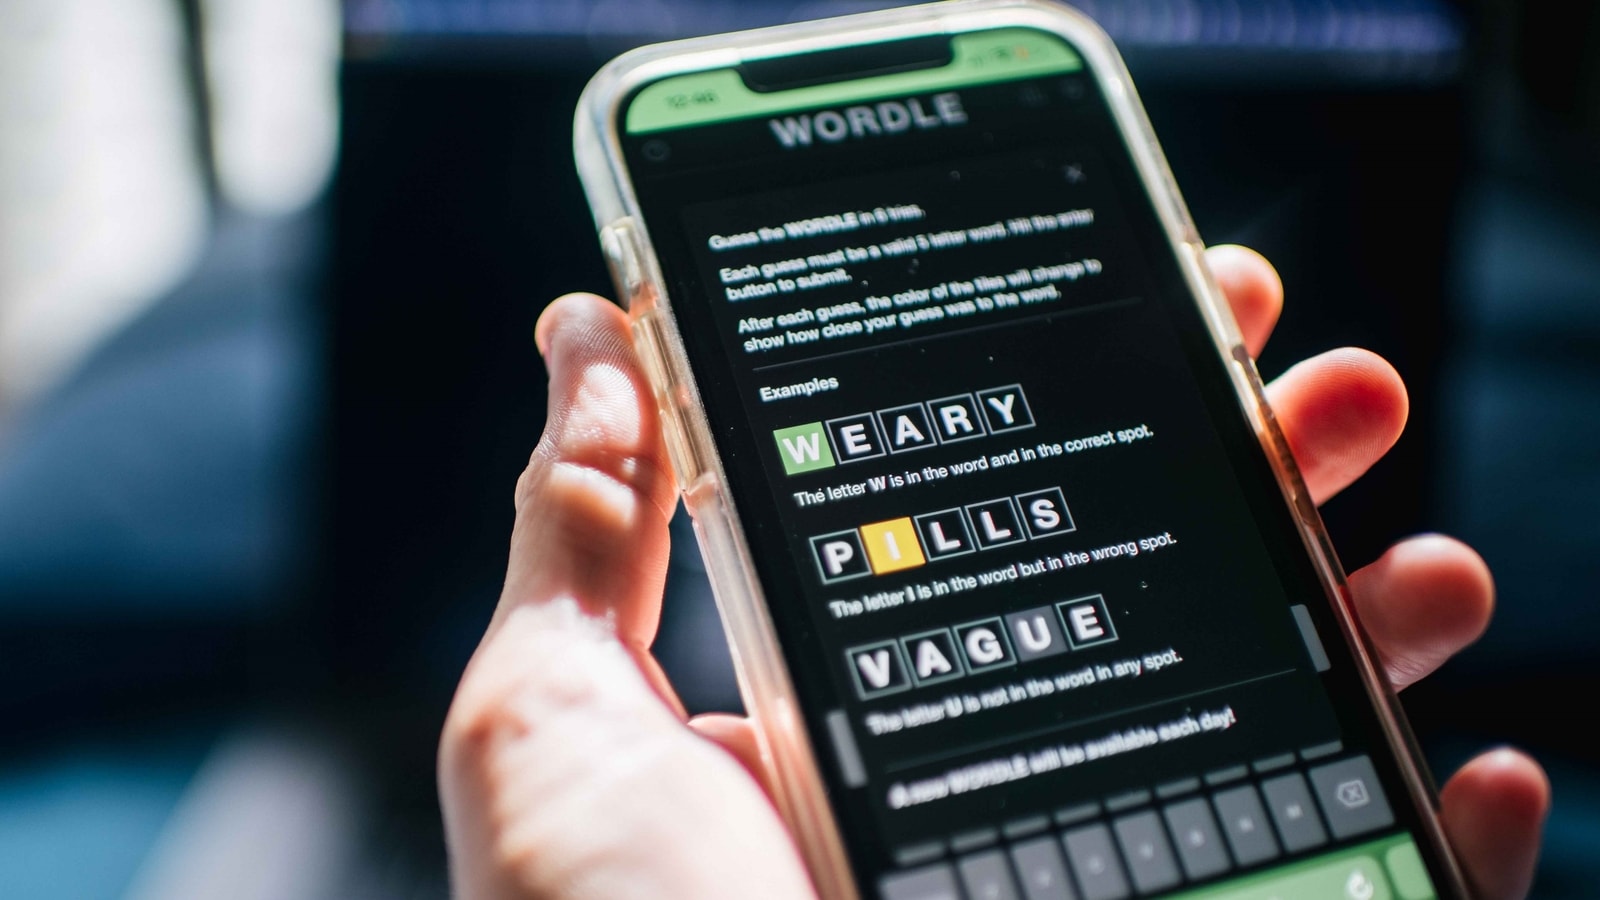 Forget Wordle, you can now play Connections on iPhone and Android